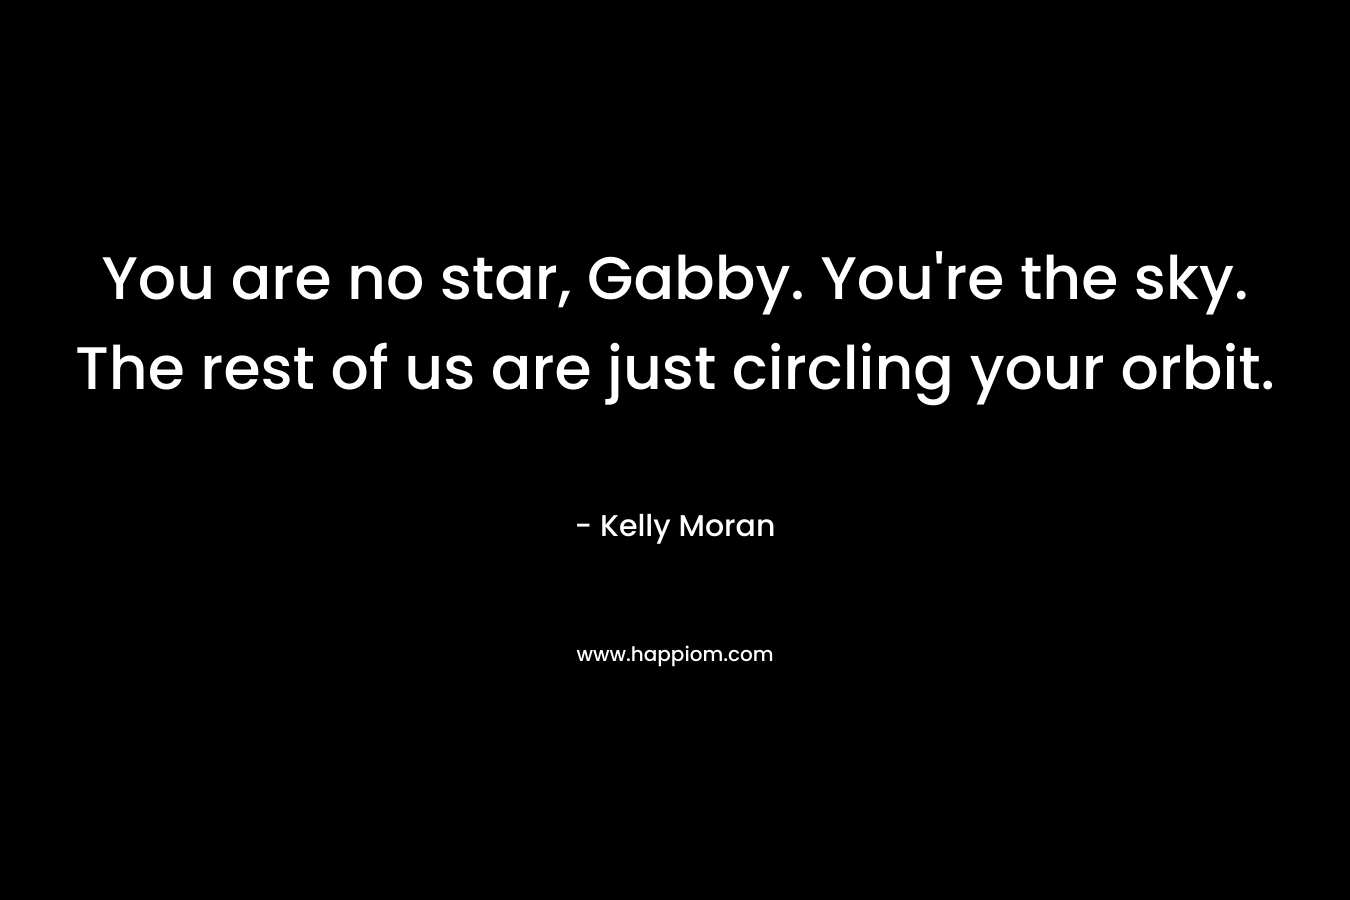 You are no star, Gabby. You're the sky. The rest of us are just circling your orbit.